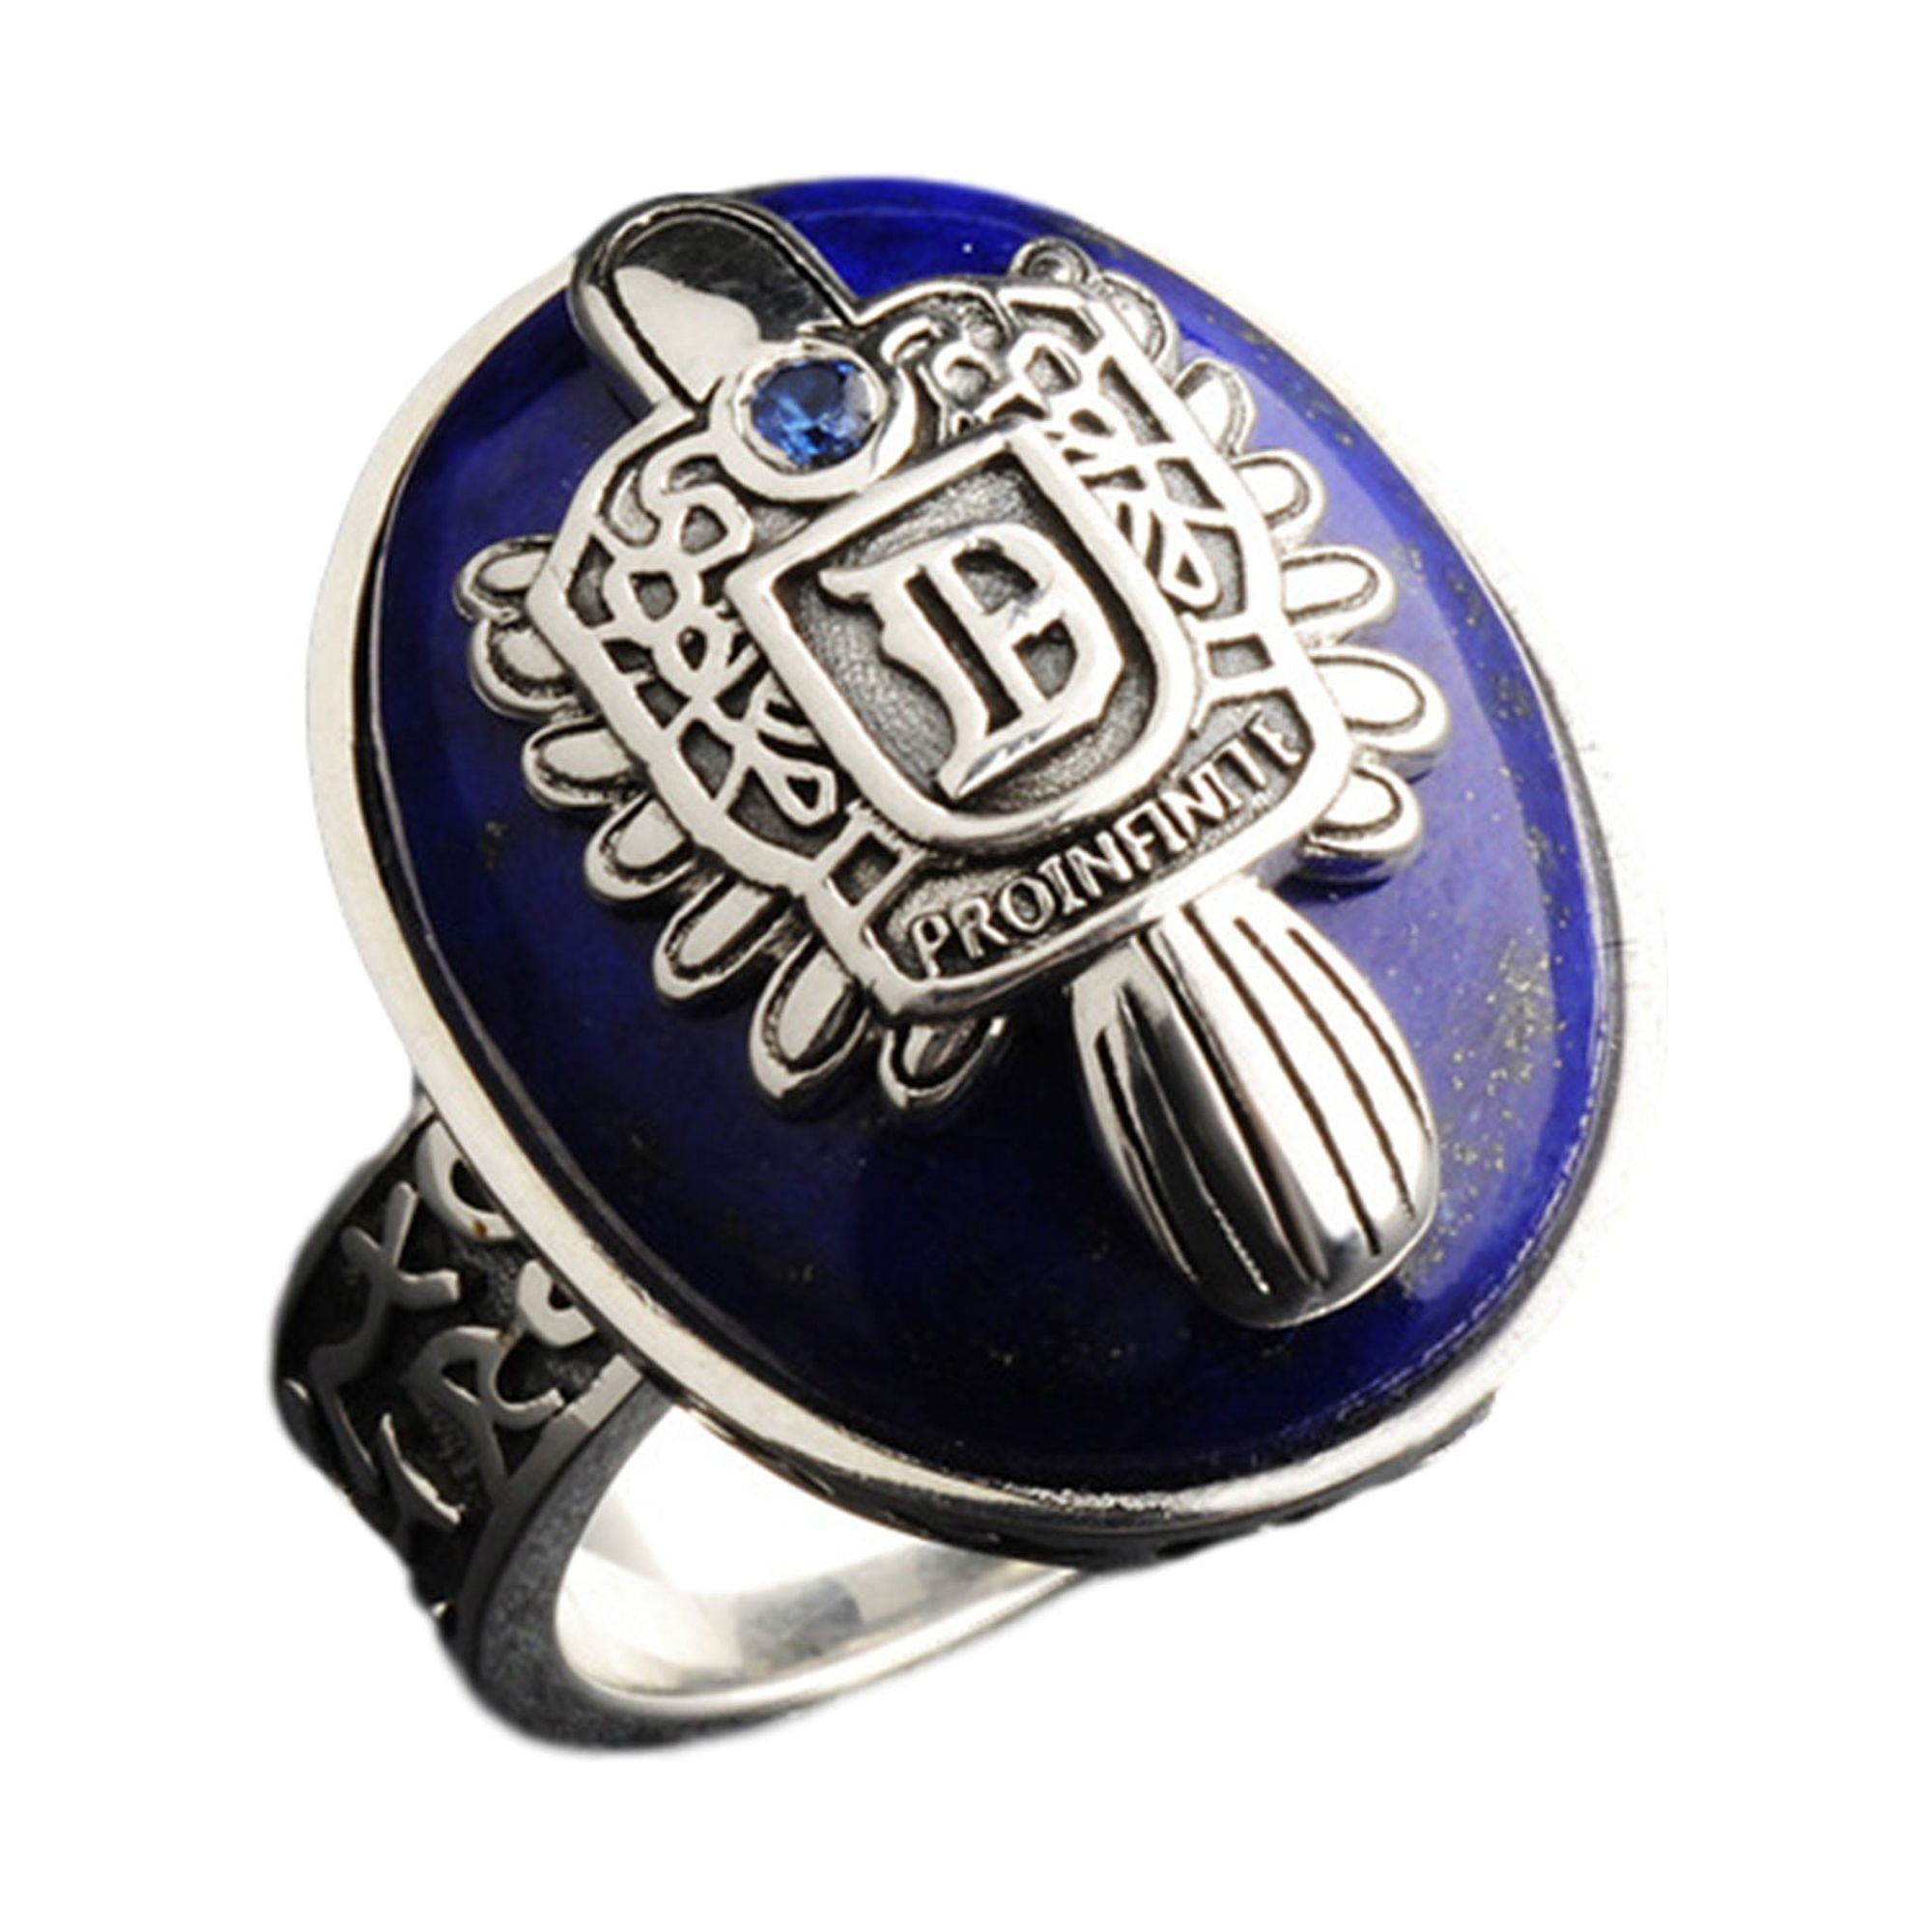 Buy Vampire Diaries Inspired Daylight Ring Featuring Genuine Lapis Lazuli  Wire Wrapped Stones Crystal Ring Crystal Wire Wrapped Ring Gift Online in  India - Etsy